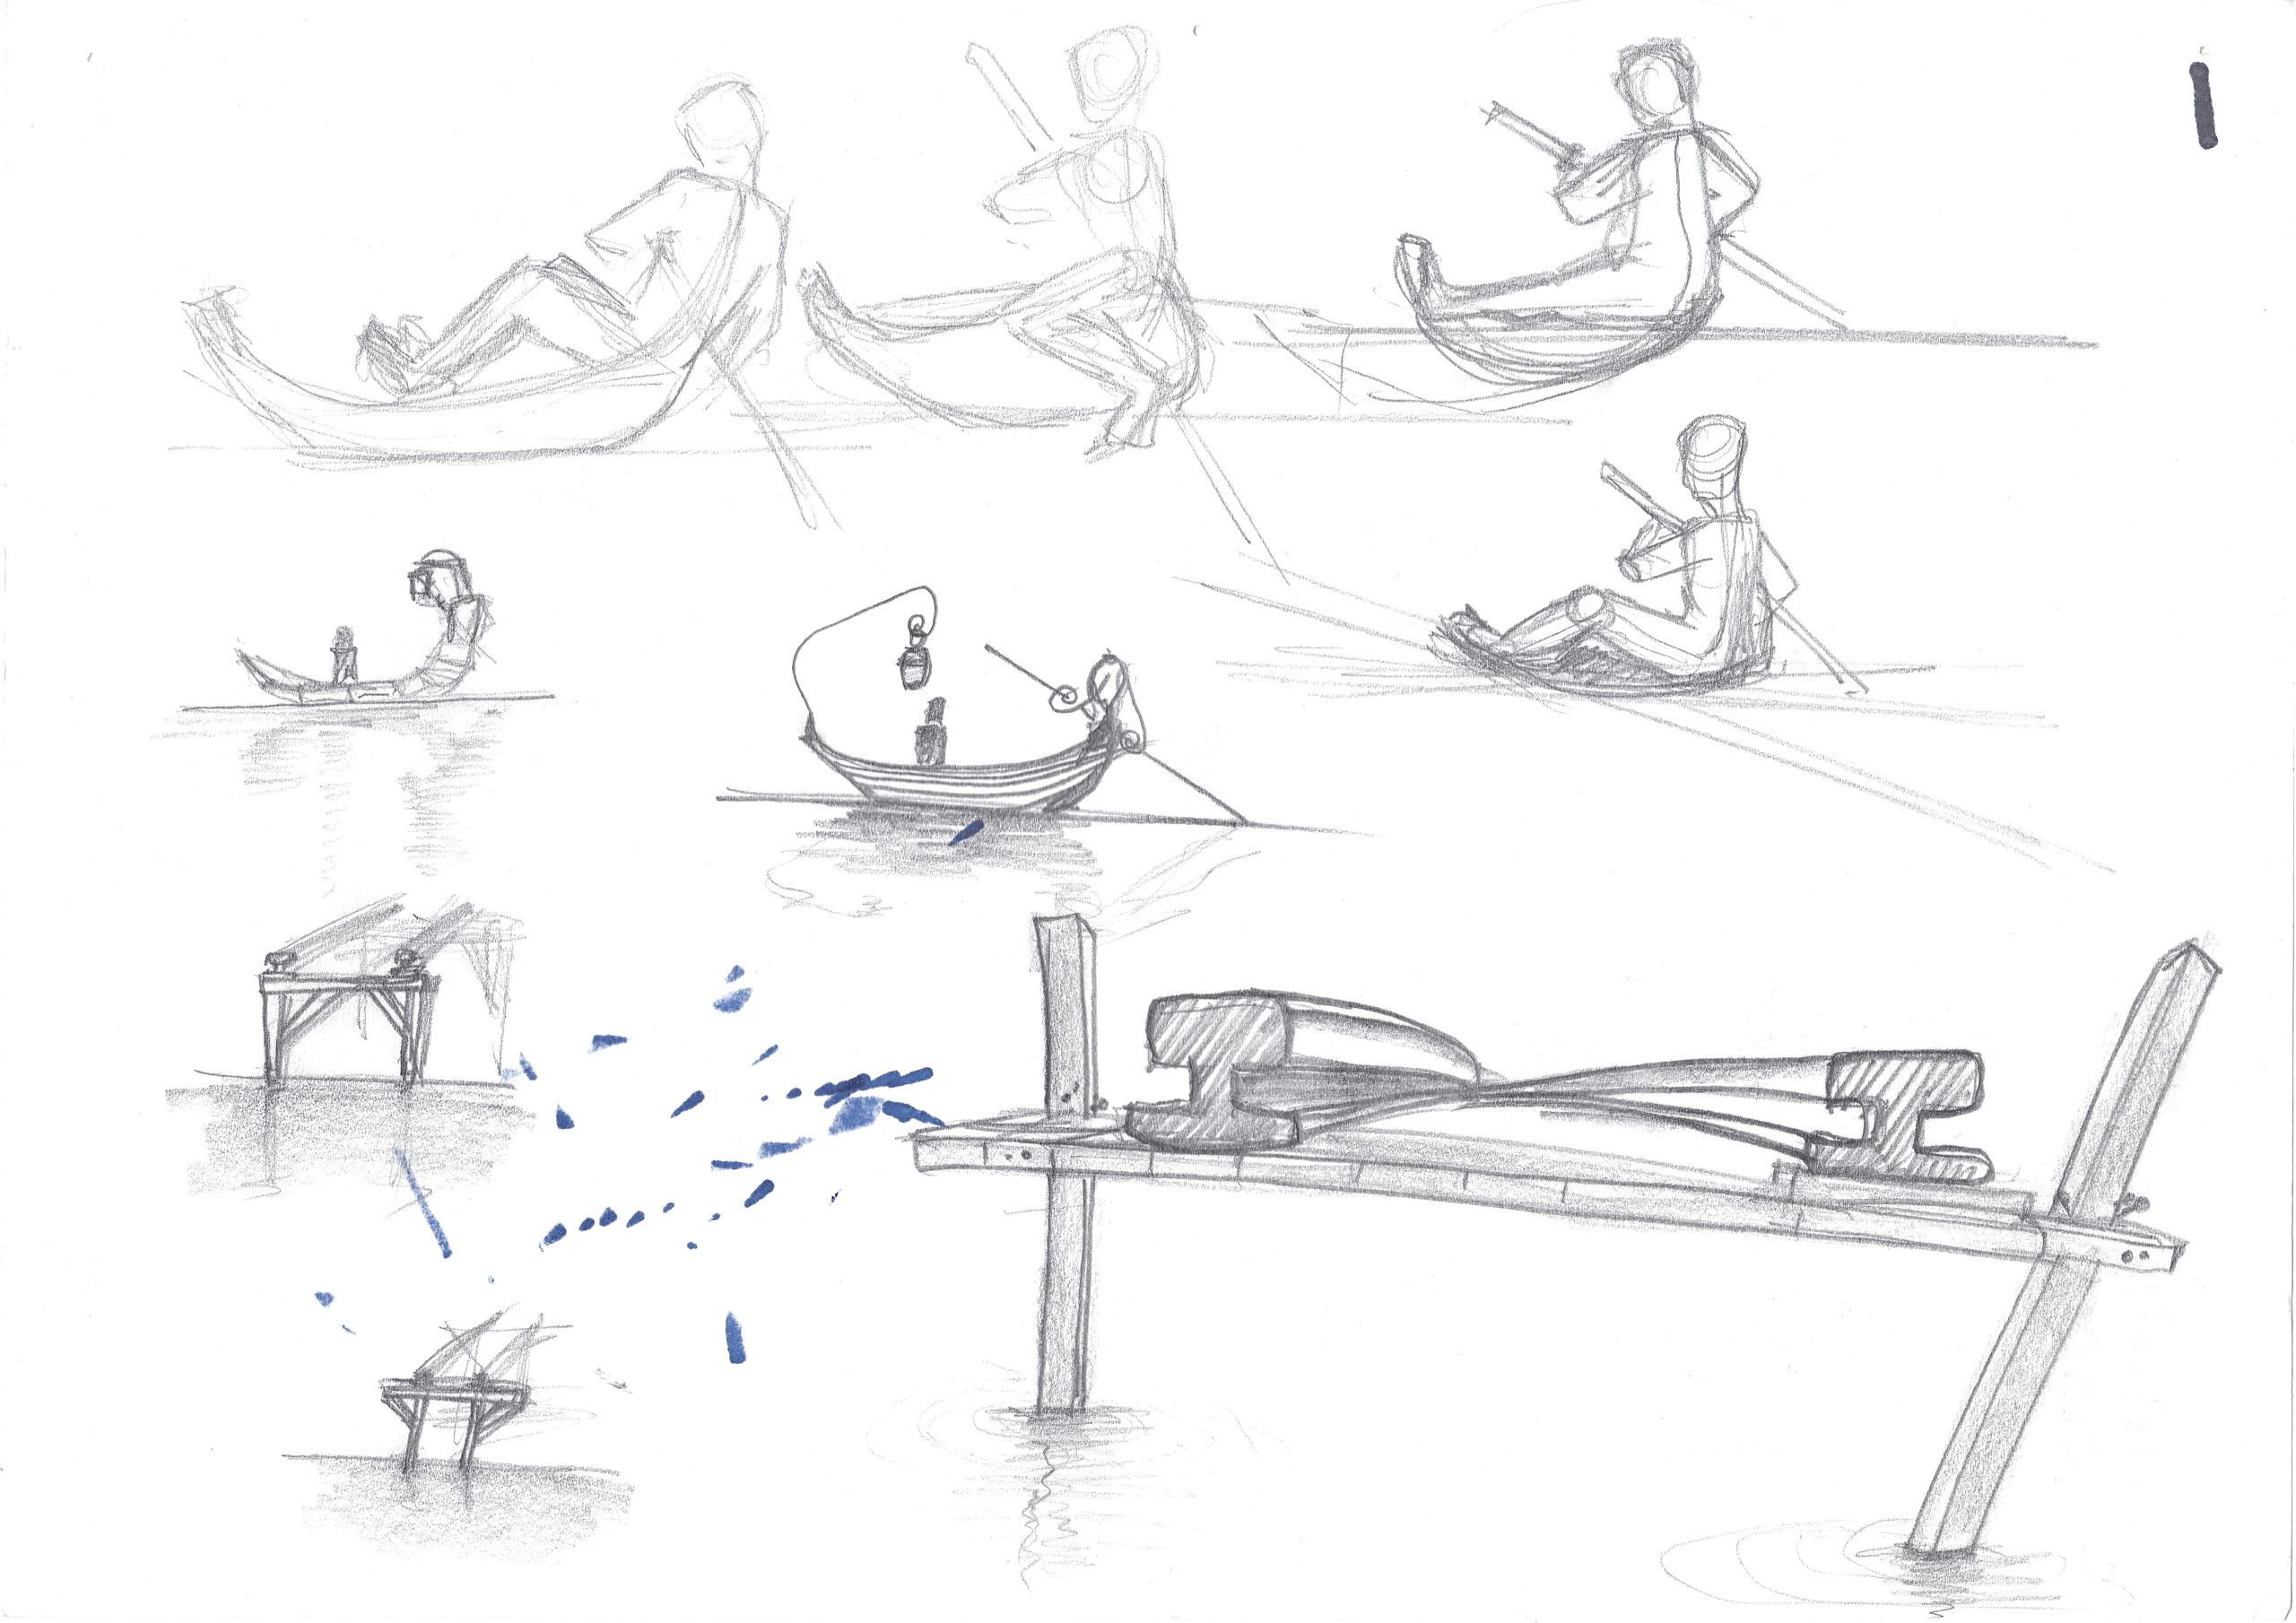 An A4 sheet with various pencil sketches of a person rowing a boat and rails on stilts terminating suddenly